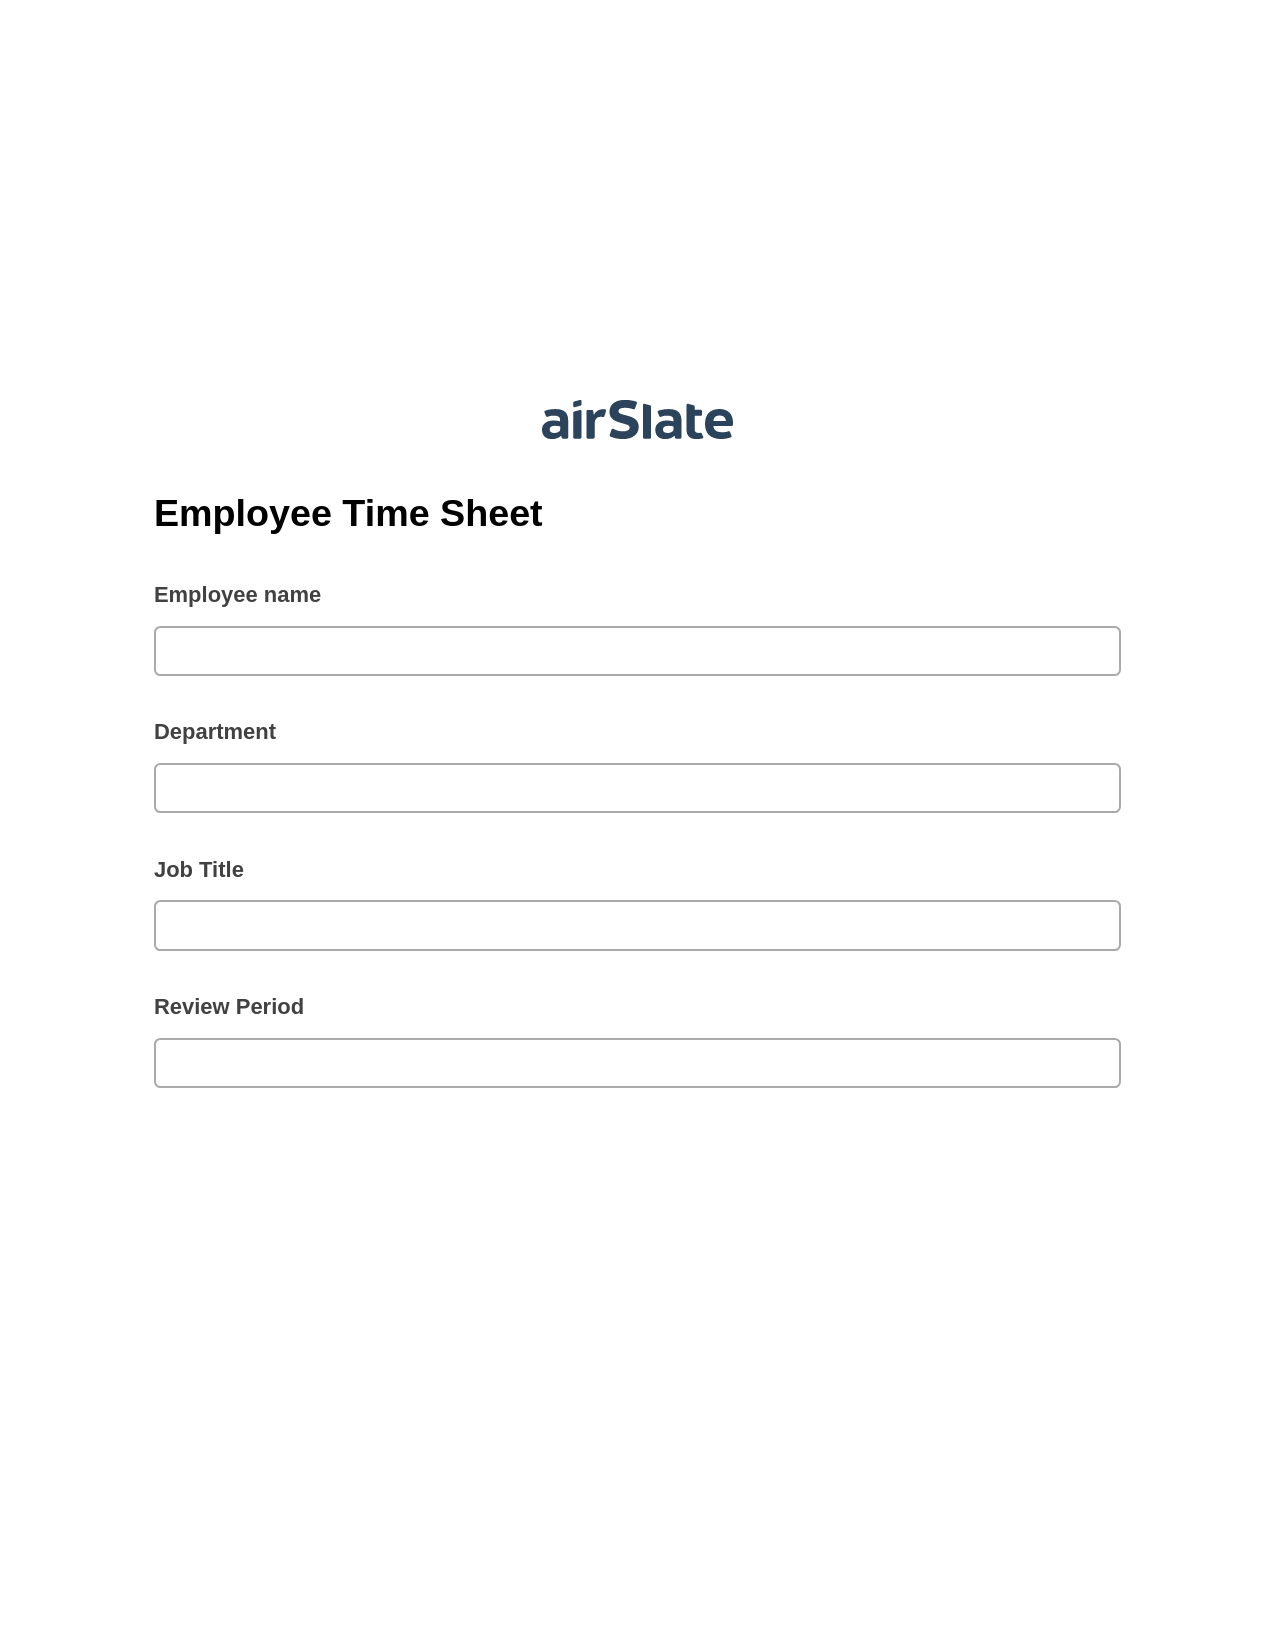 Employee Time Sheet Pre-fill Dropdowns from CSV file Bot, Create slate addon, Archive to Box Bot